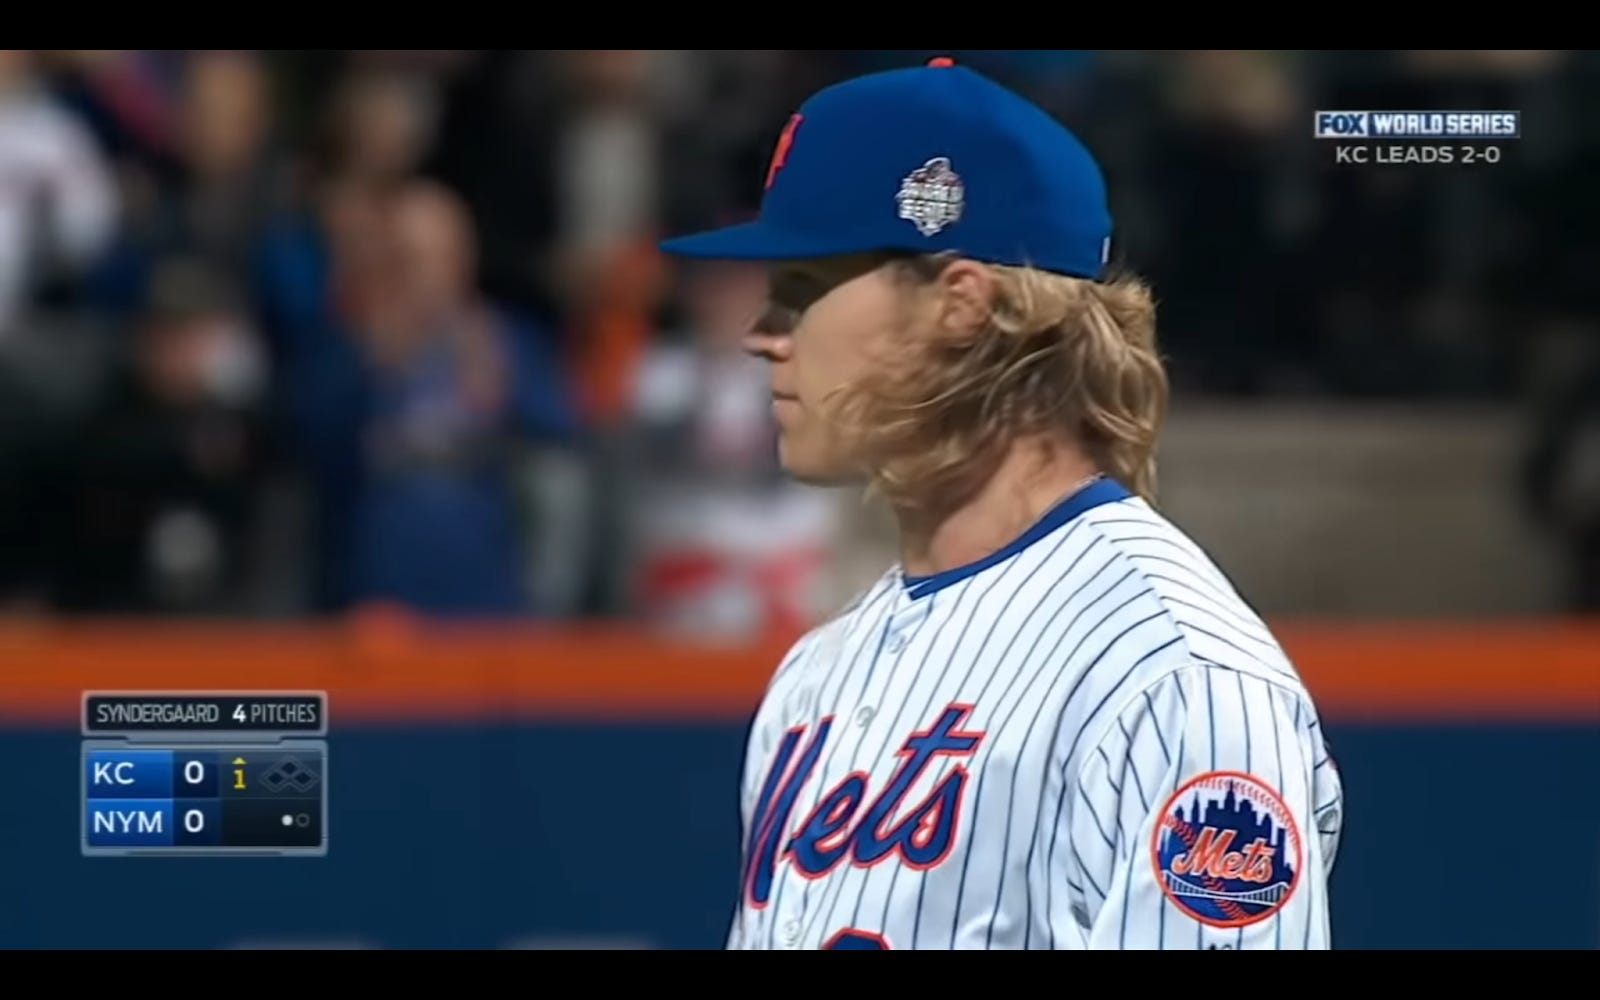 Who wins the hair battle between deGrom and Syndergaard? 